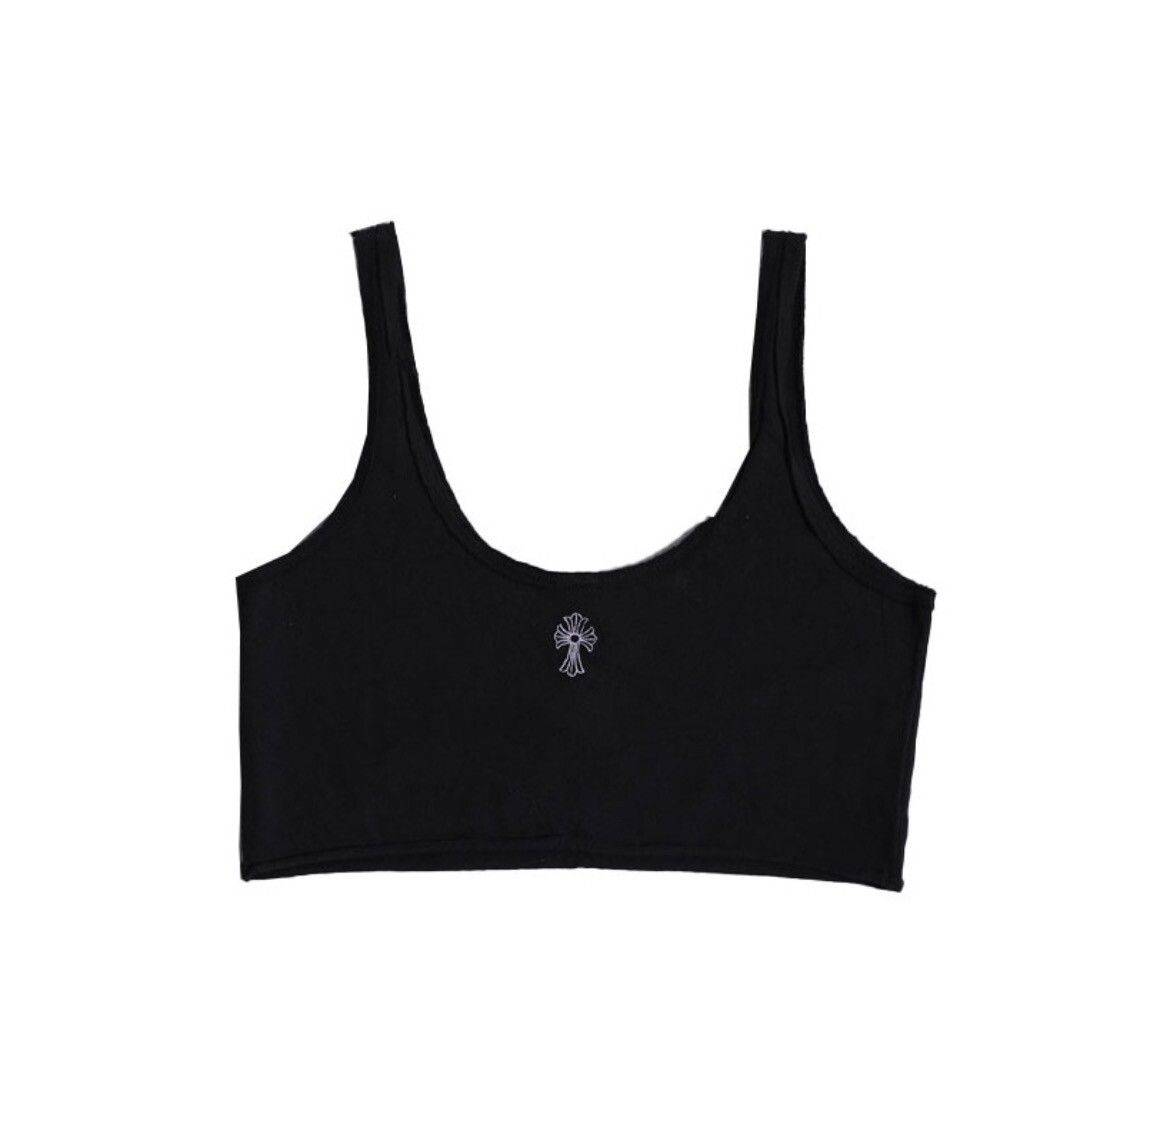 Embroidered cross logo GRP Y Not tank top tee - 2